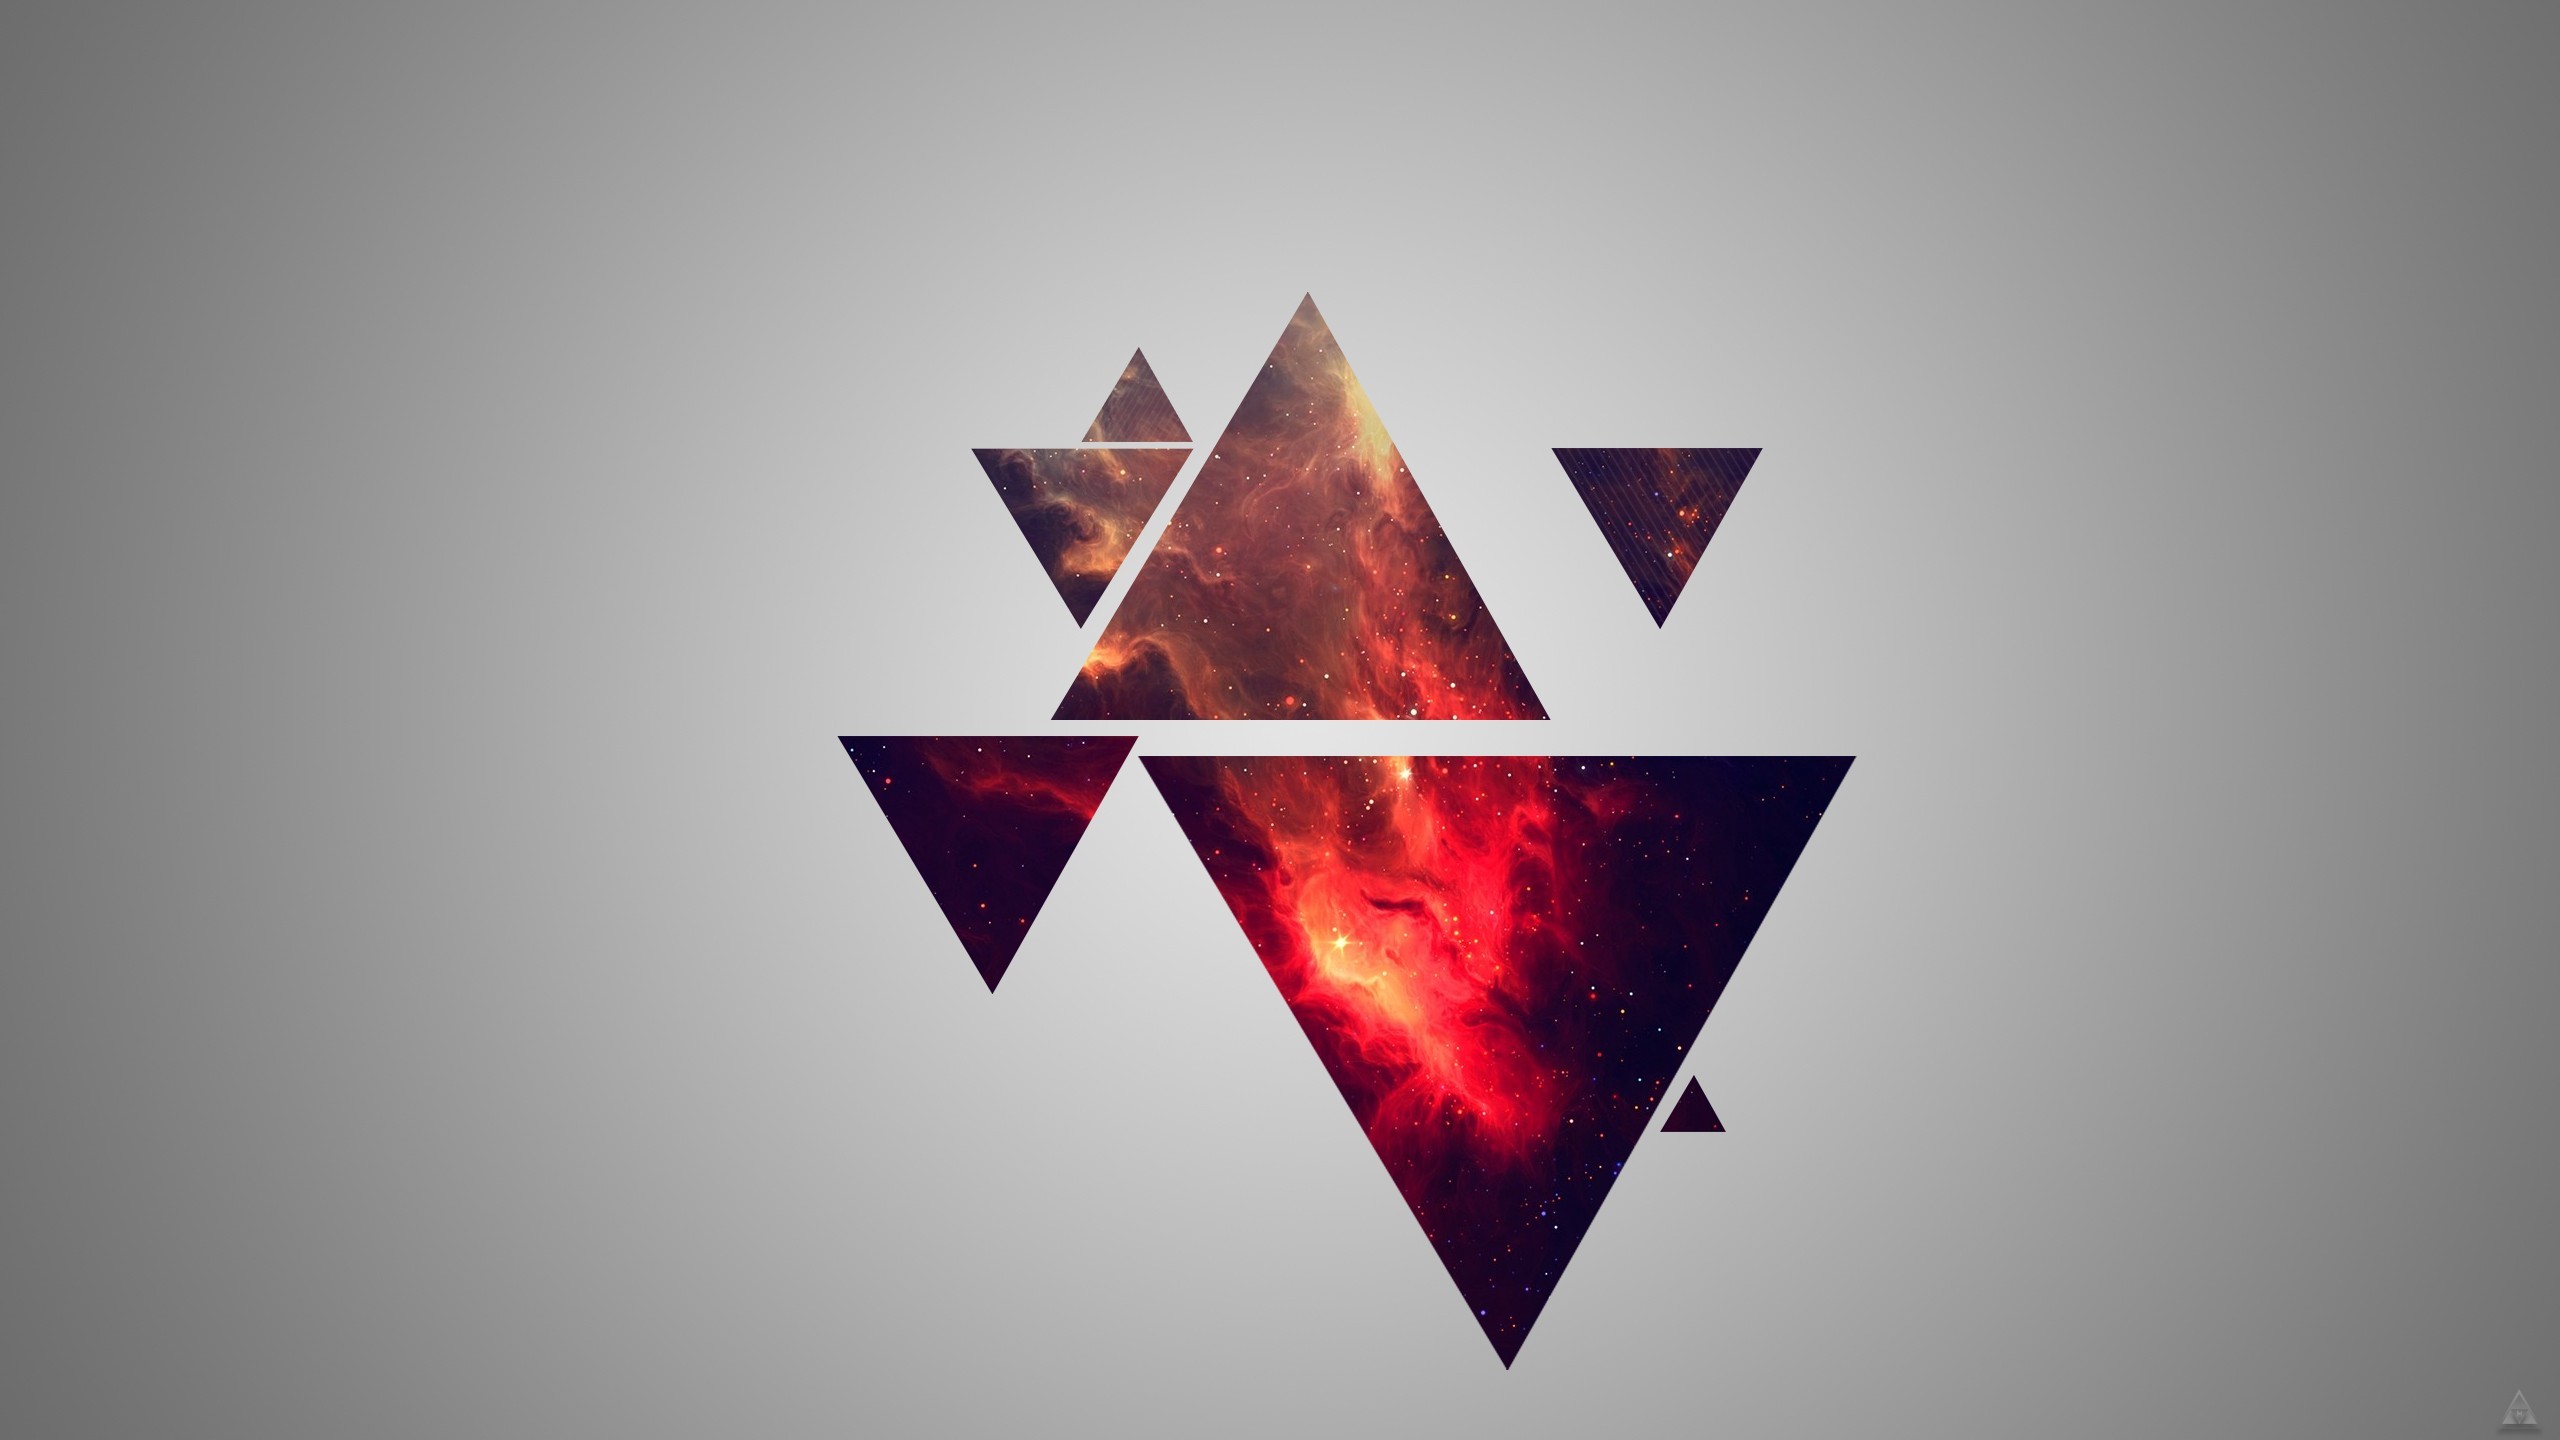 2560x1440 Indie-Tumblr-Triangles-Wide-Wallpaper